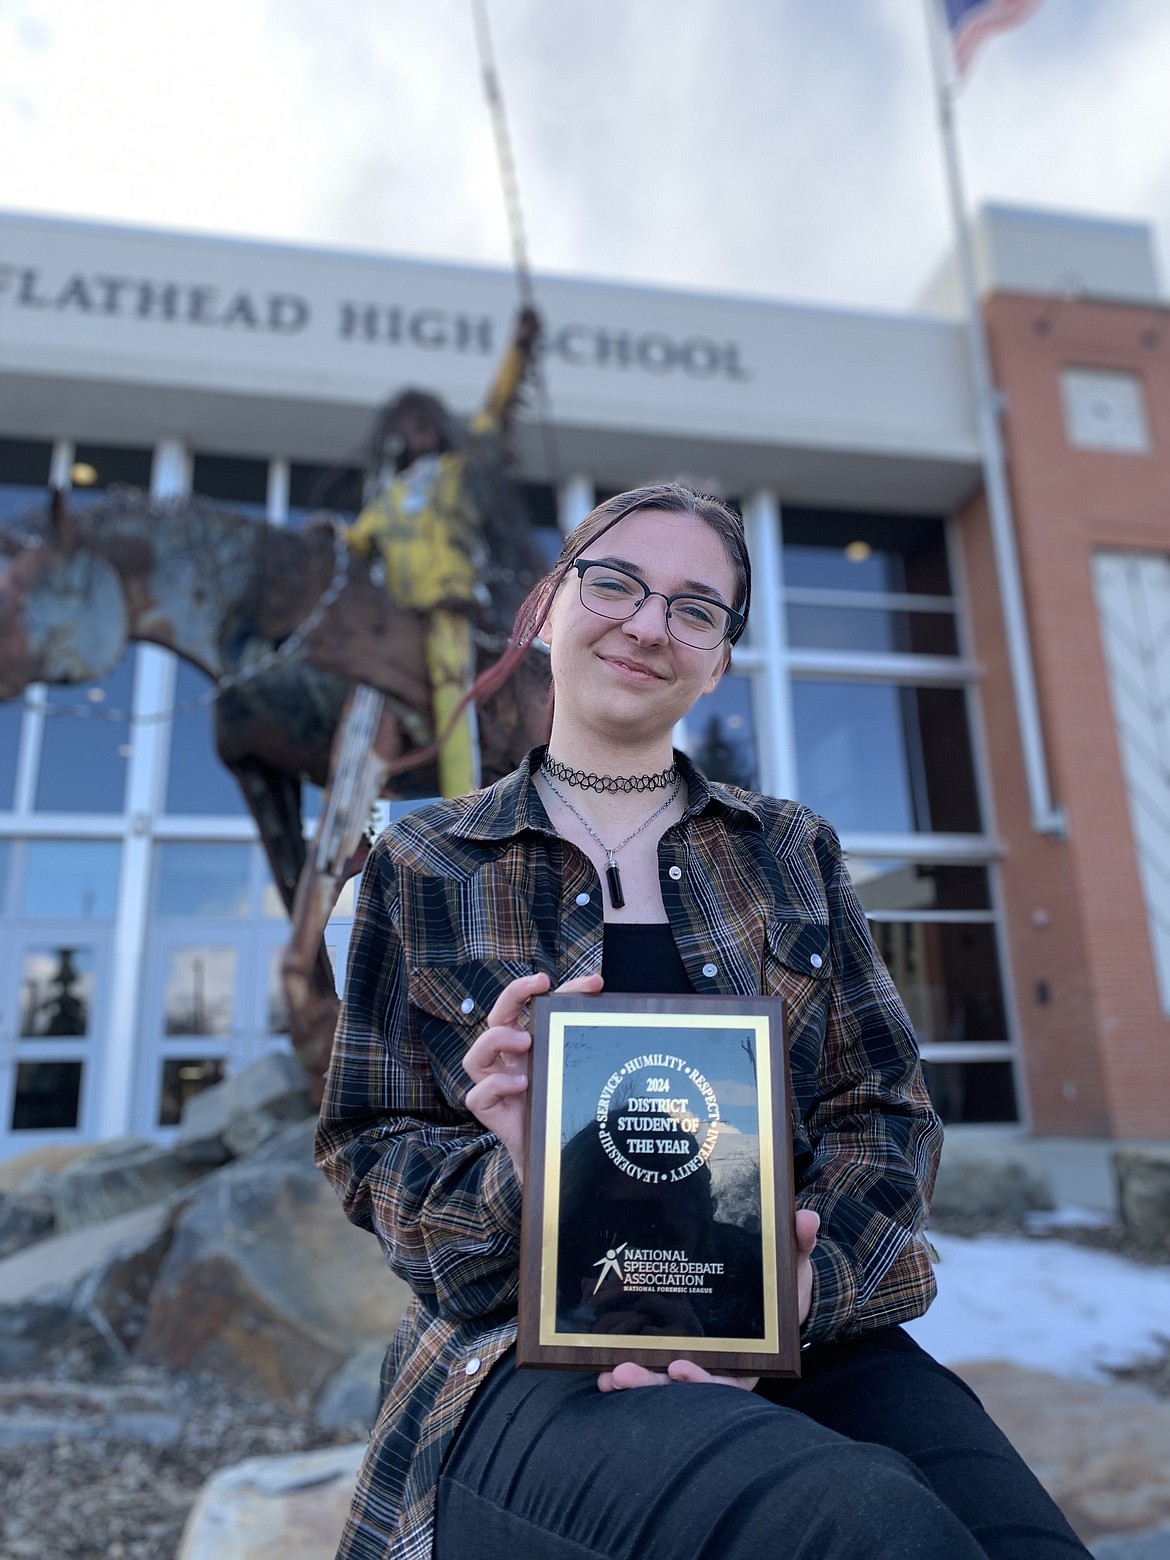 Flathead High School senior Rachel Ottman was named Student of the Year for the Montana West District of the National Speech and Debate Association. (Photo by Lindy Porter)